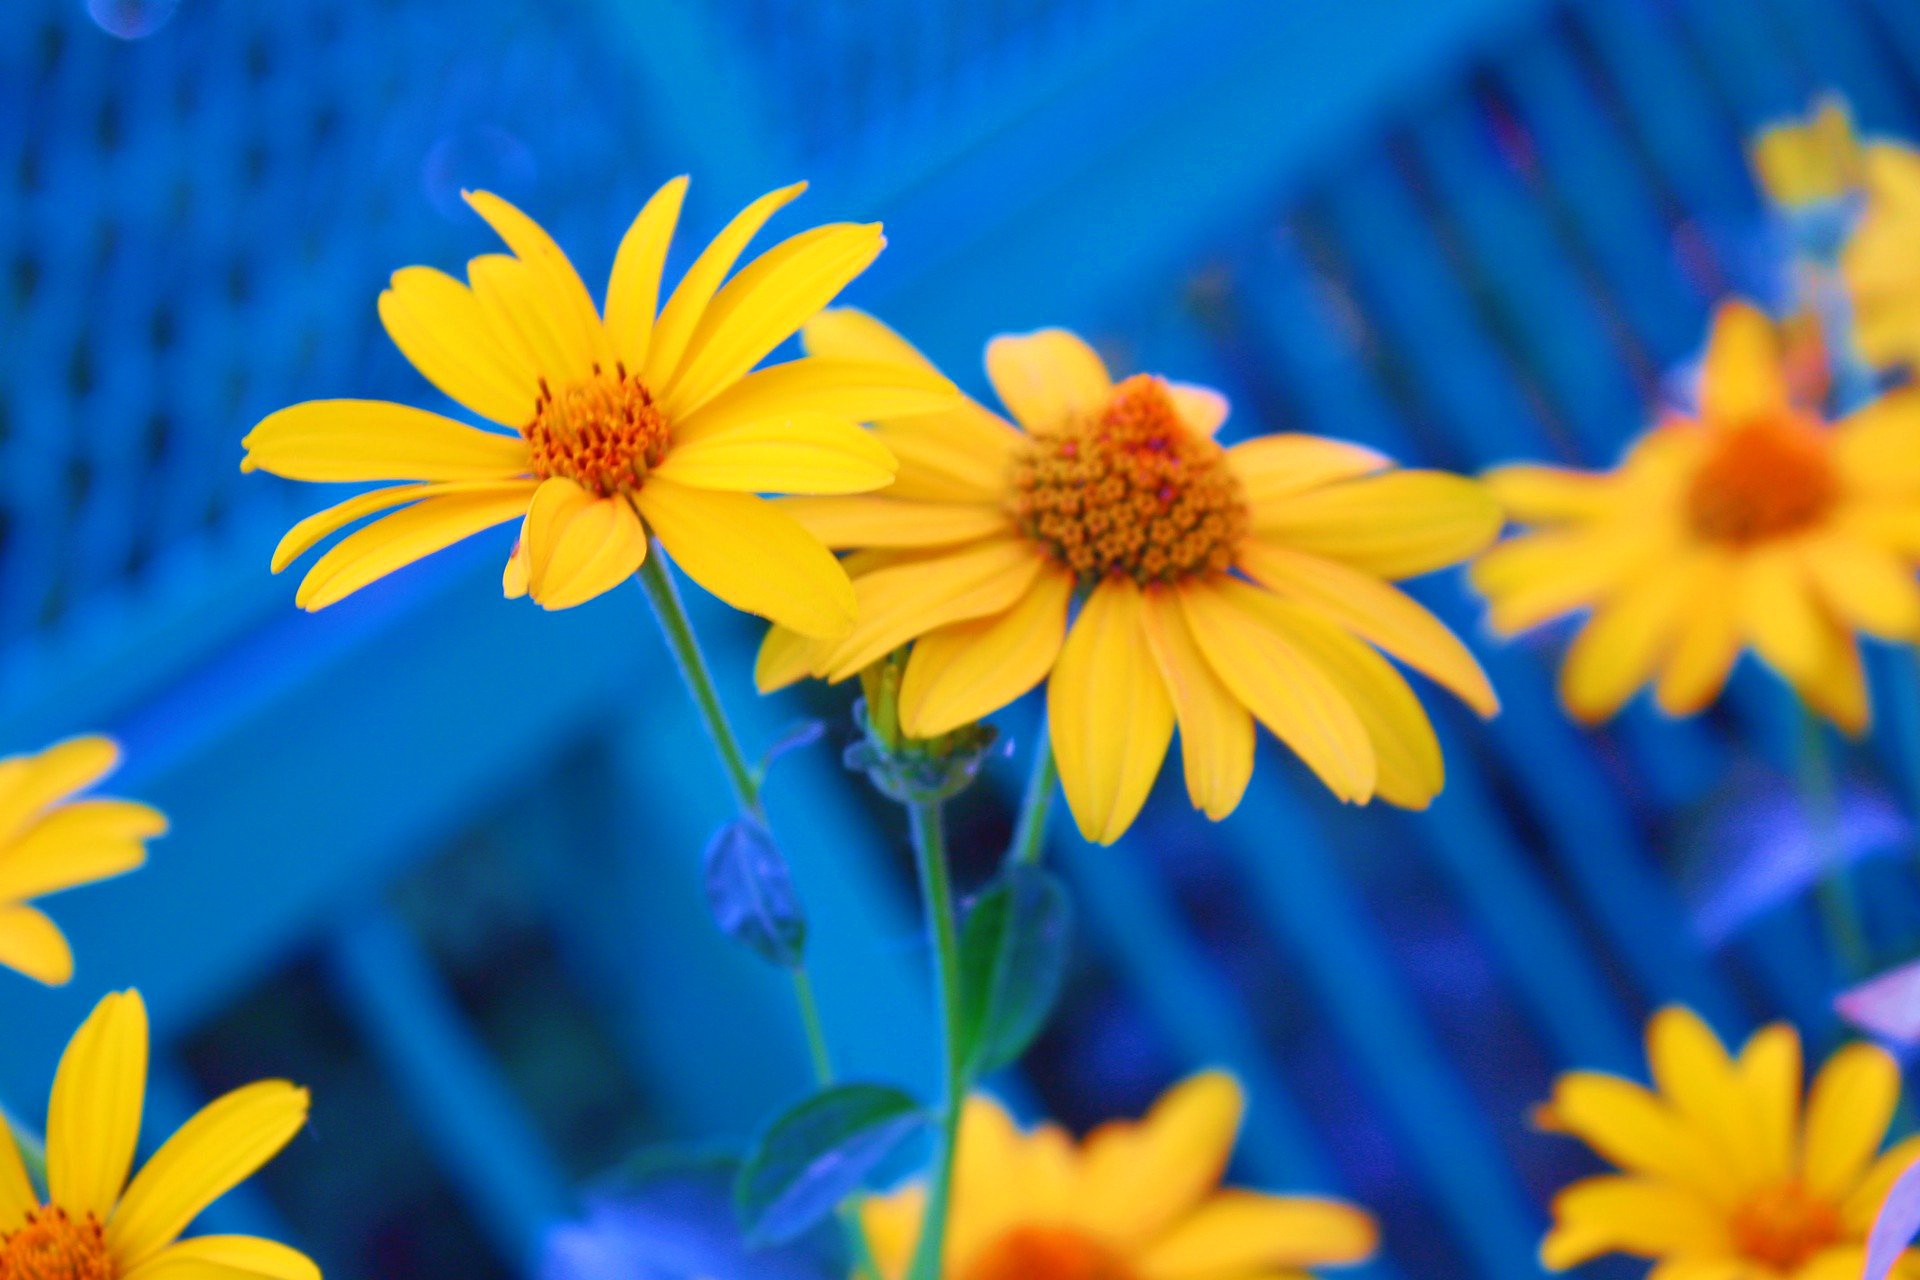 <img src="yellow.jpg" alt="yellow sunflowers how to add colour to your garden"/> 